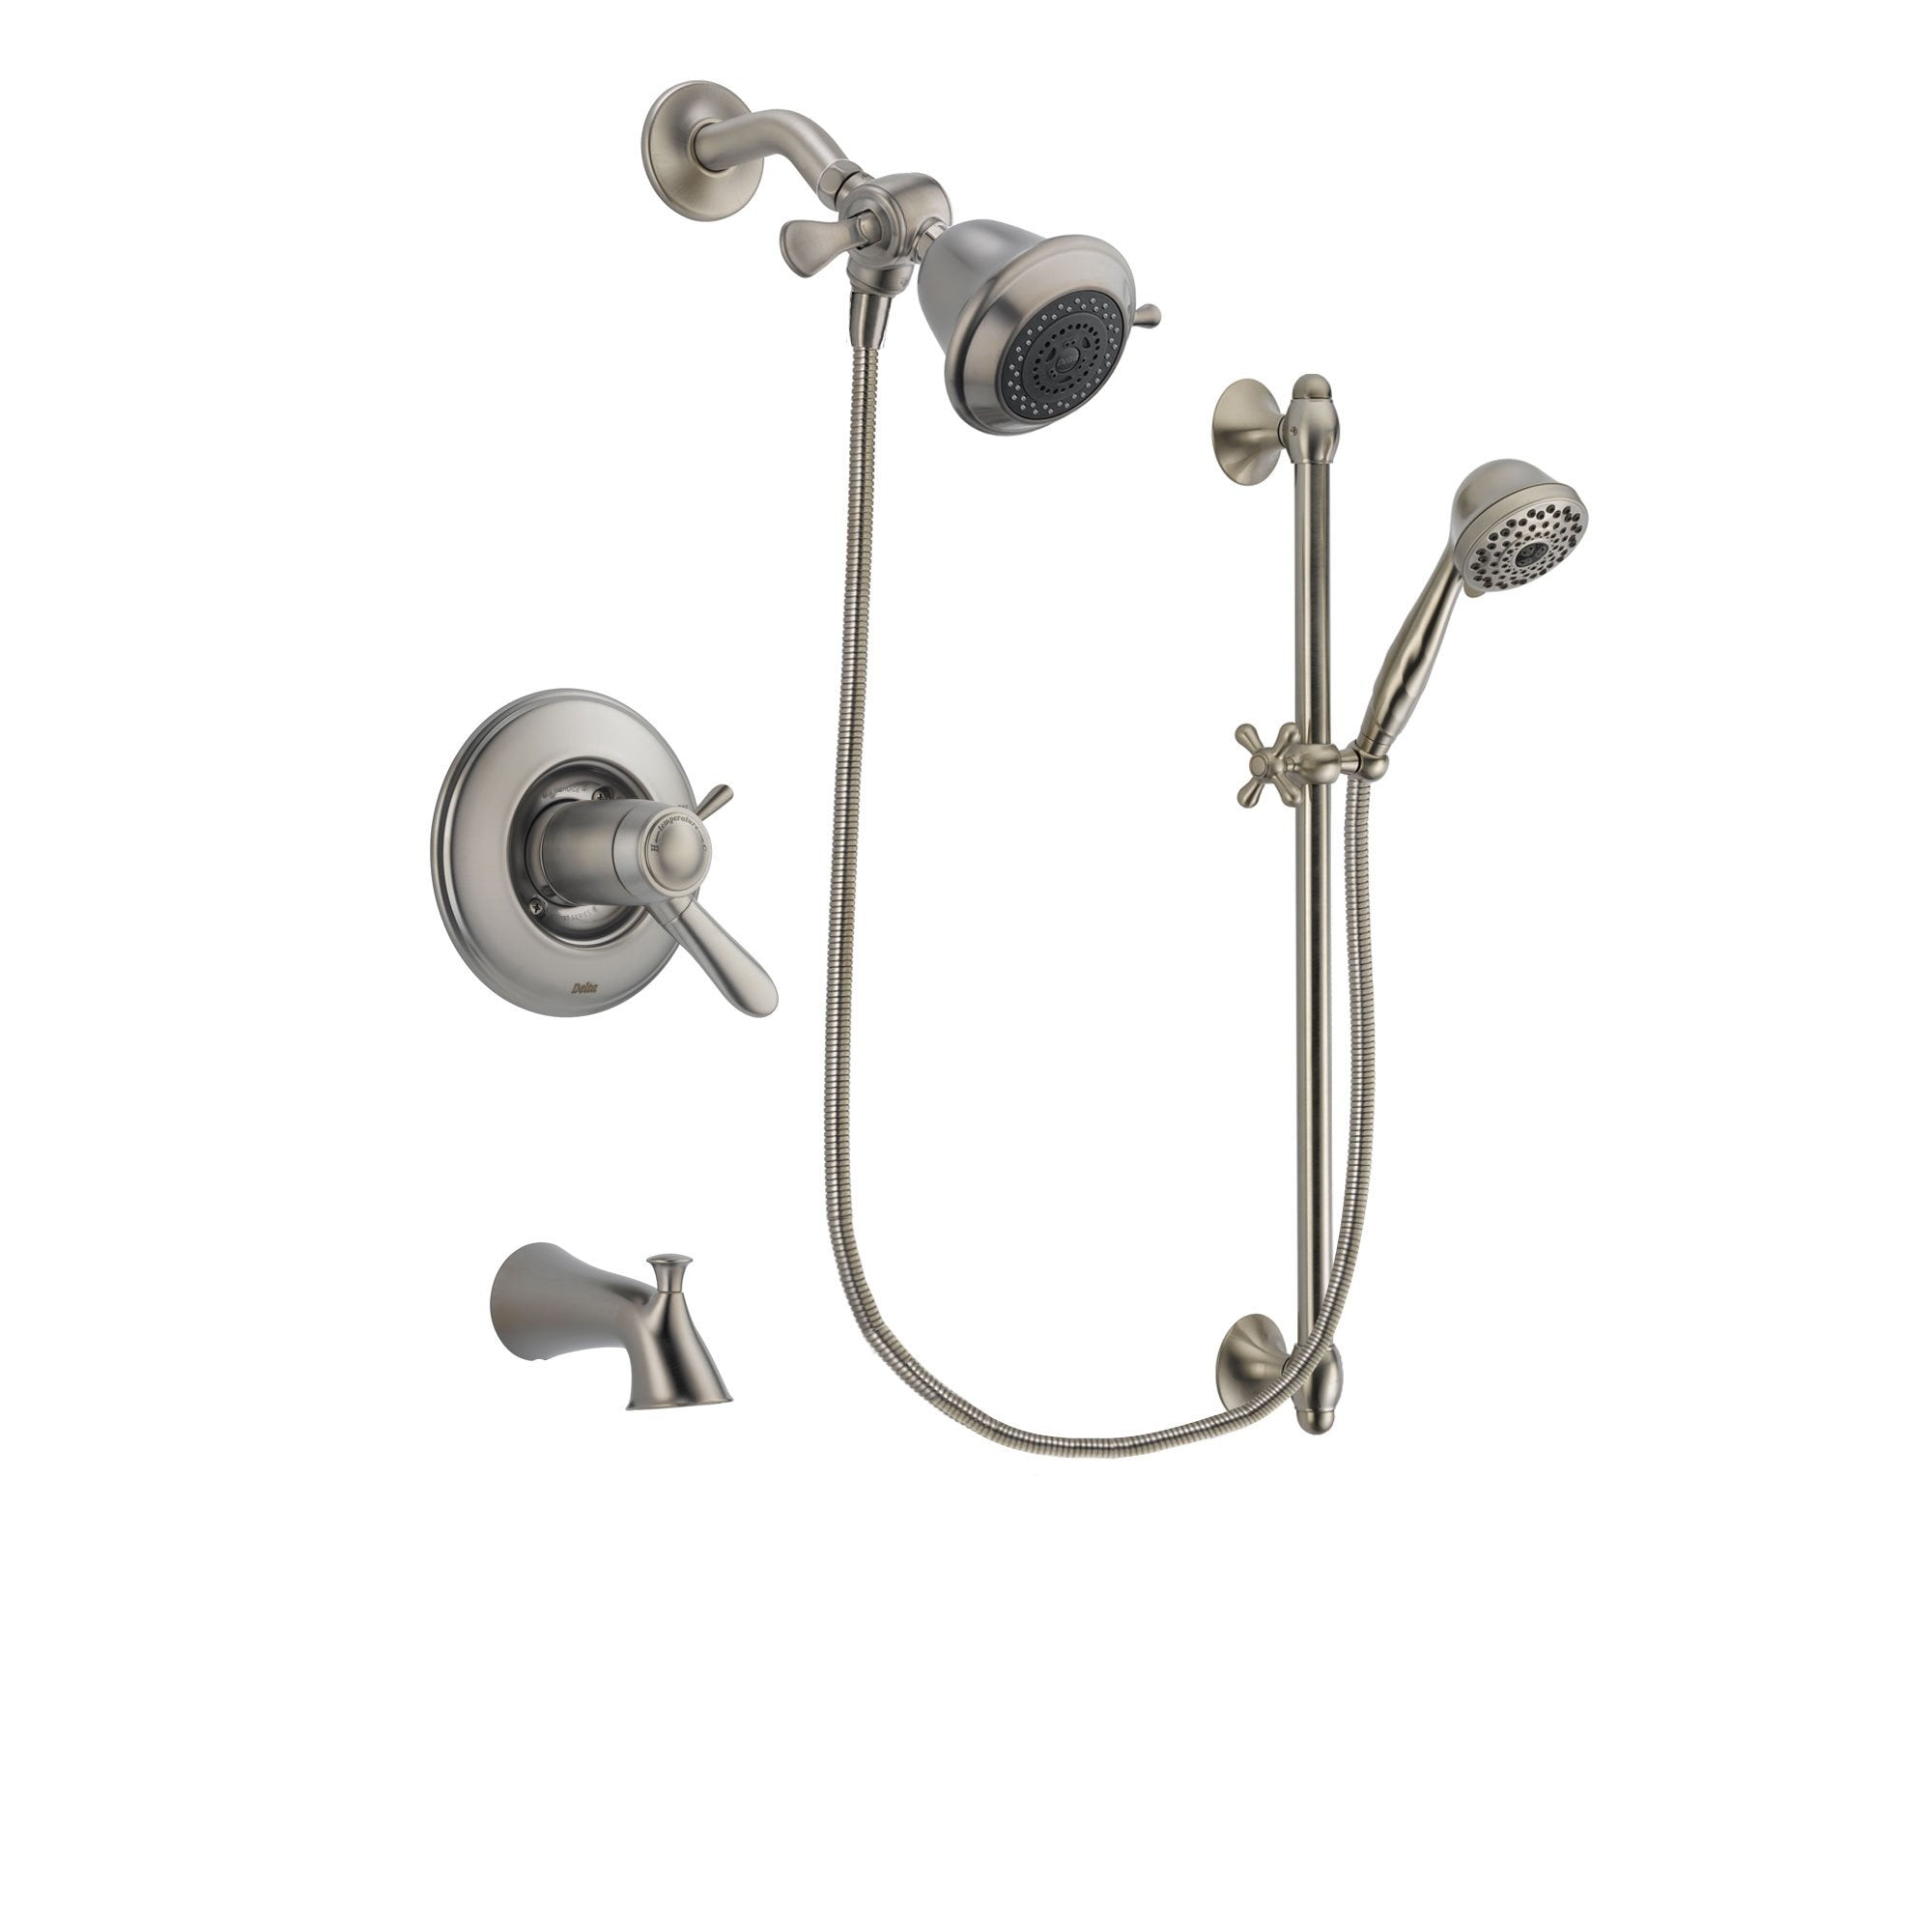 Delta Lahara Stainless Steel Finish Thermostatic Tub and Shower Faucet System Package with Shower Head and 7-Spray Handheld Shower with Slide Bar Includes Rough-in Valve and Tub Spout DSP1649V